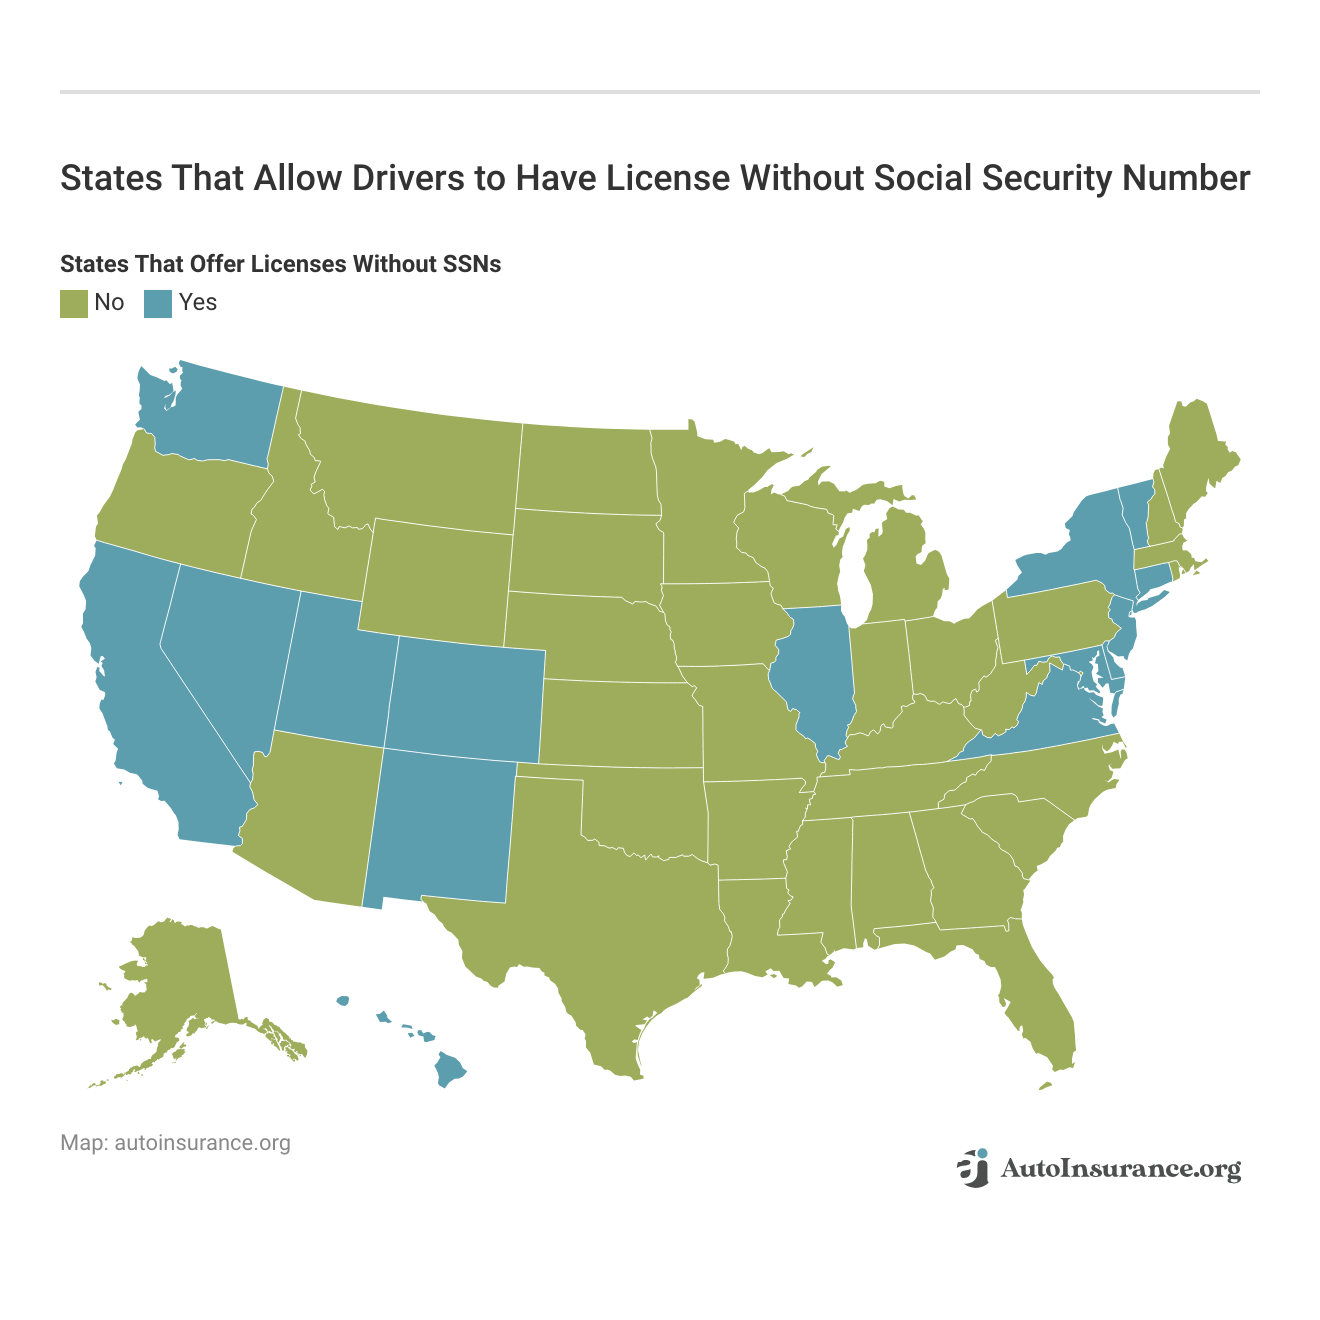 <h3>States That Allow Drivers to Have License Without Social Security Number</h3>